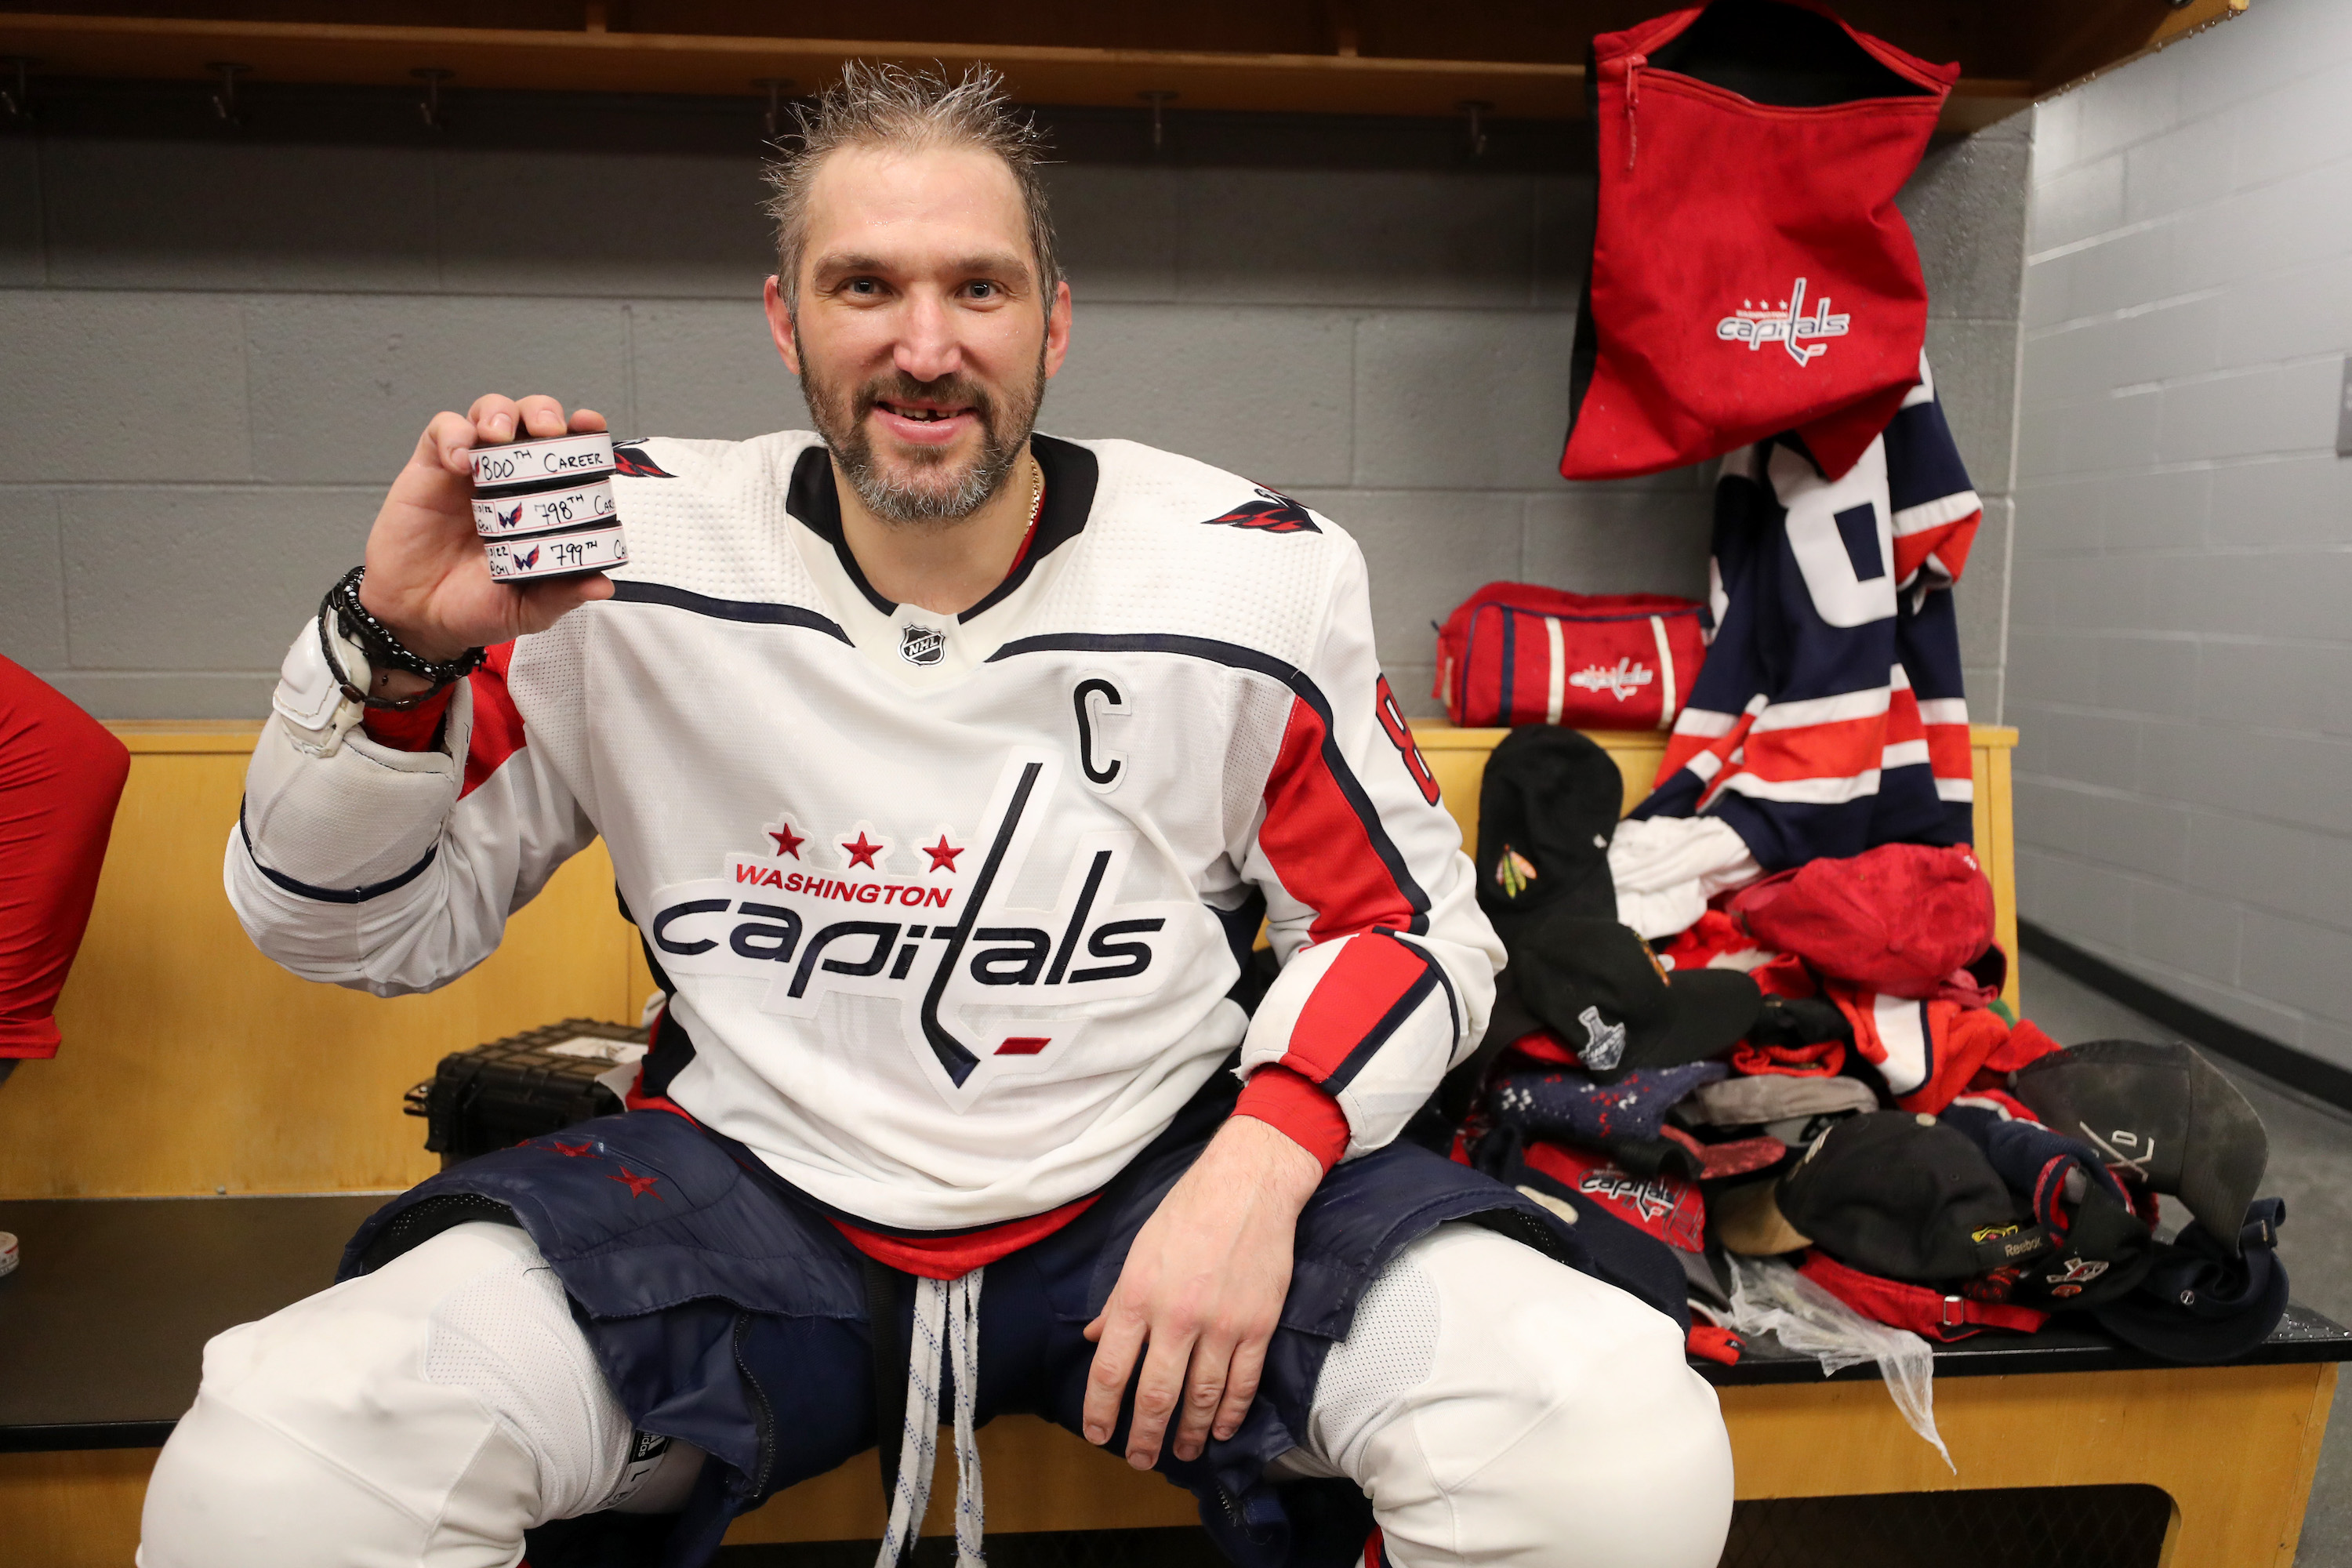 CHICAGO, ILLINOIS - DECEMBER 13: Alex Ovechkin #8 of the Washington Capitals poses for a photo after scoring a hat-trick and his 800th career goal, following the game against the Chicago Blackhawks at United Center on December 13, 2022 in Chicago, Illinois. (Photo by Chase Agnello-Dean/NHLI via Getty Images)